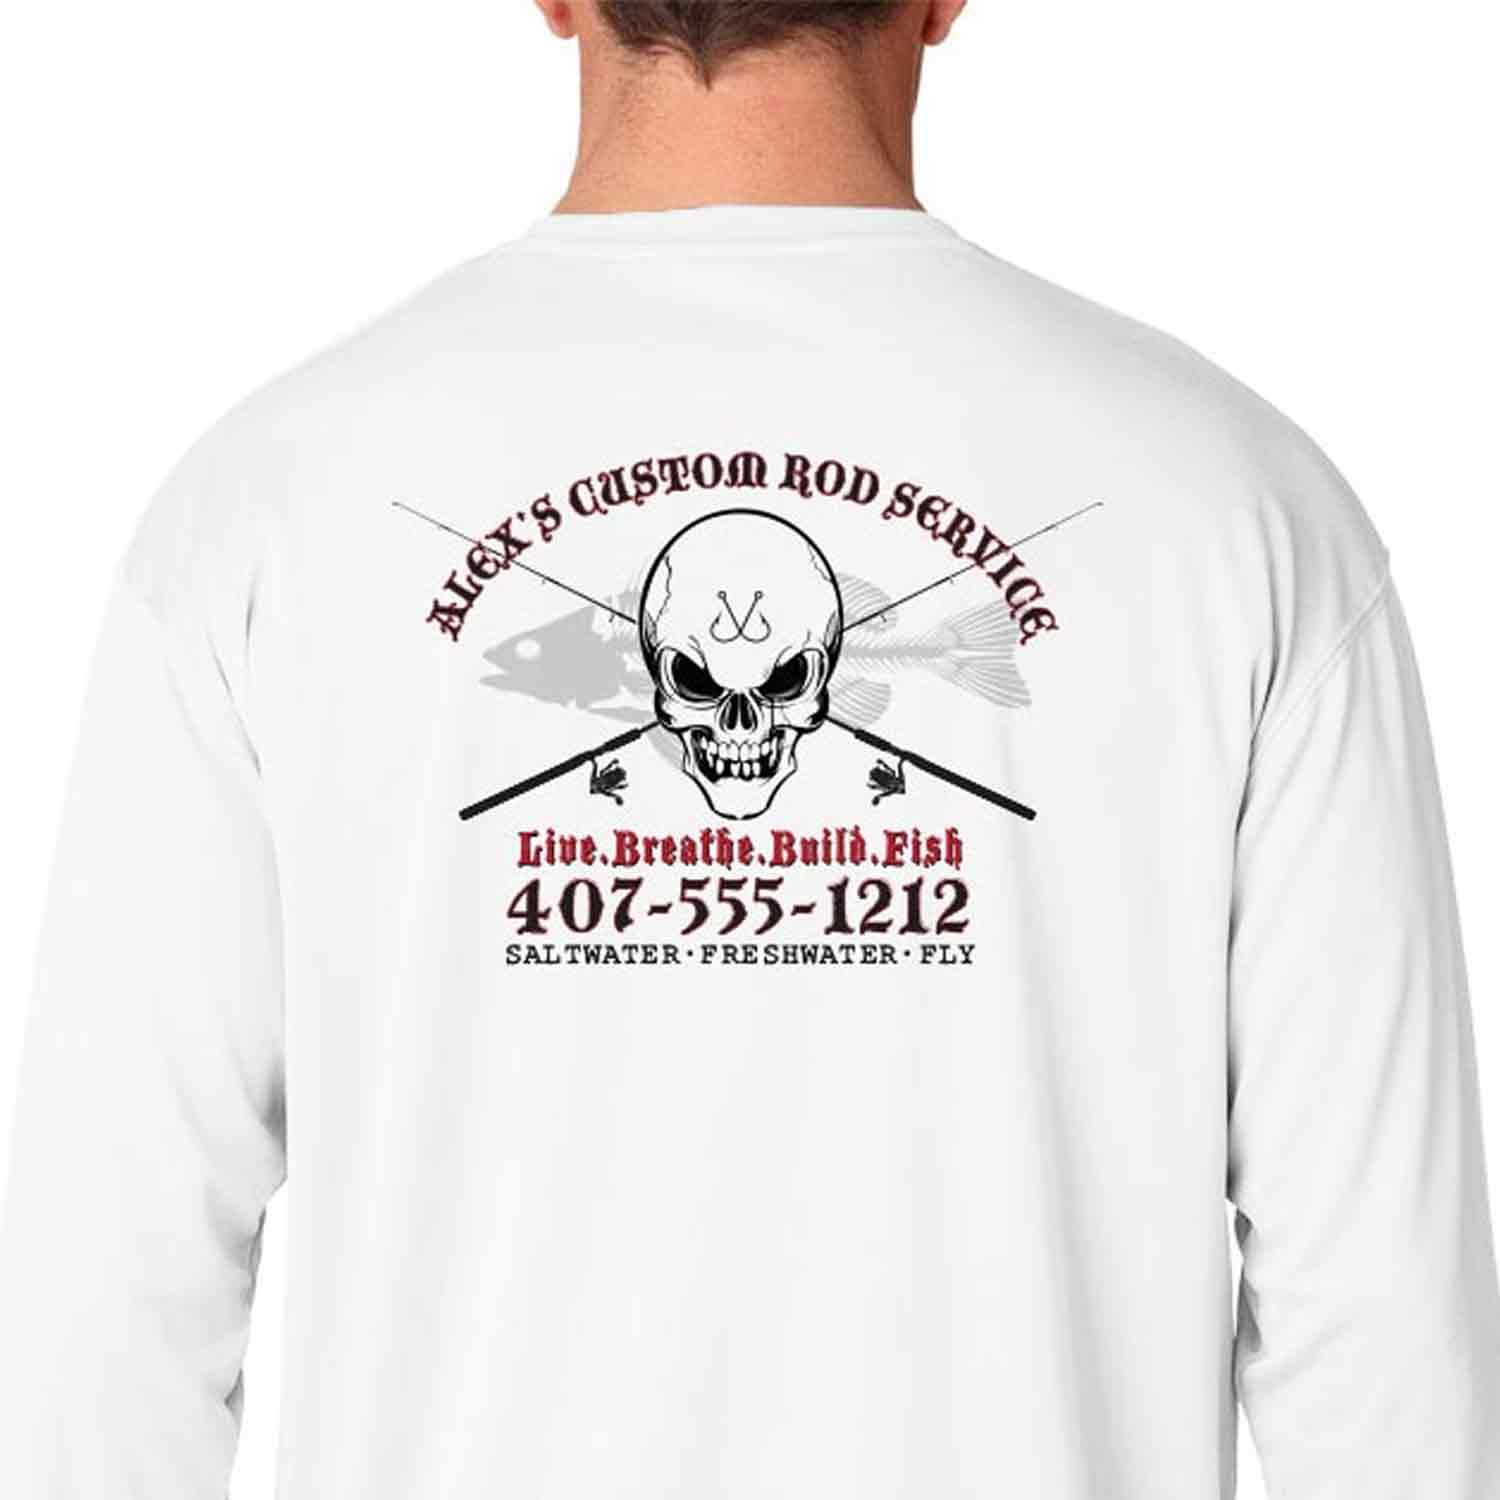 Long-Sleeve Mesh Performance Tee: Skull with Crossing Rods